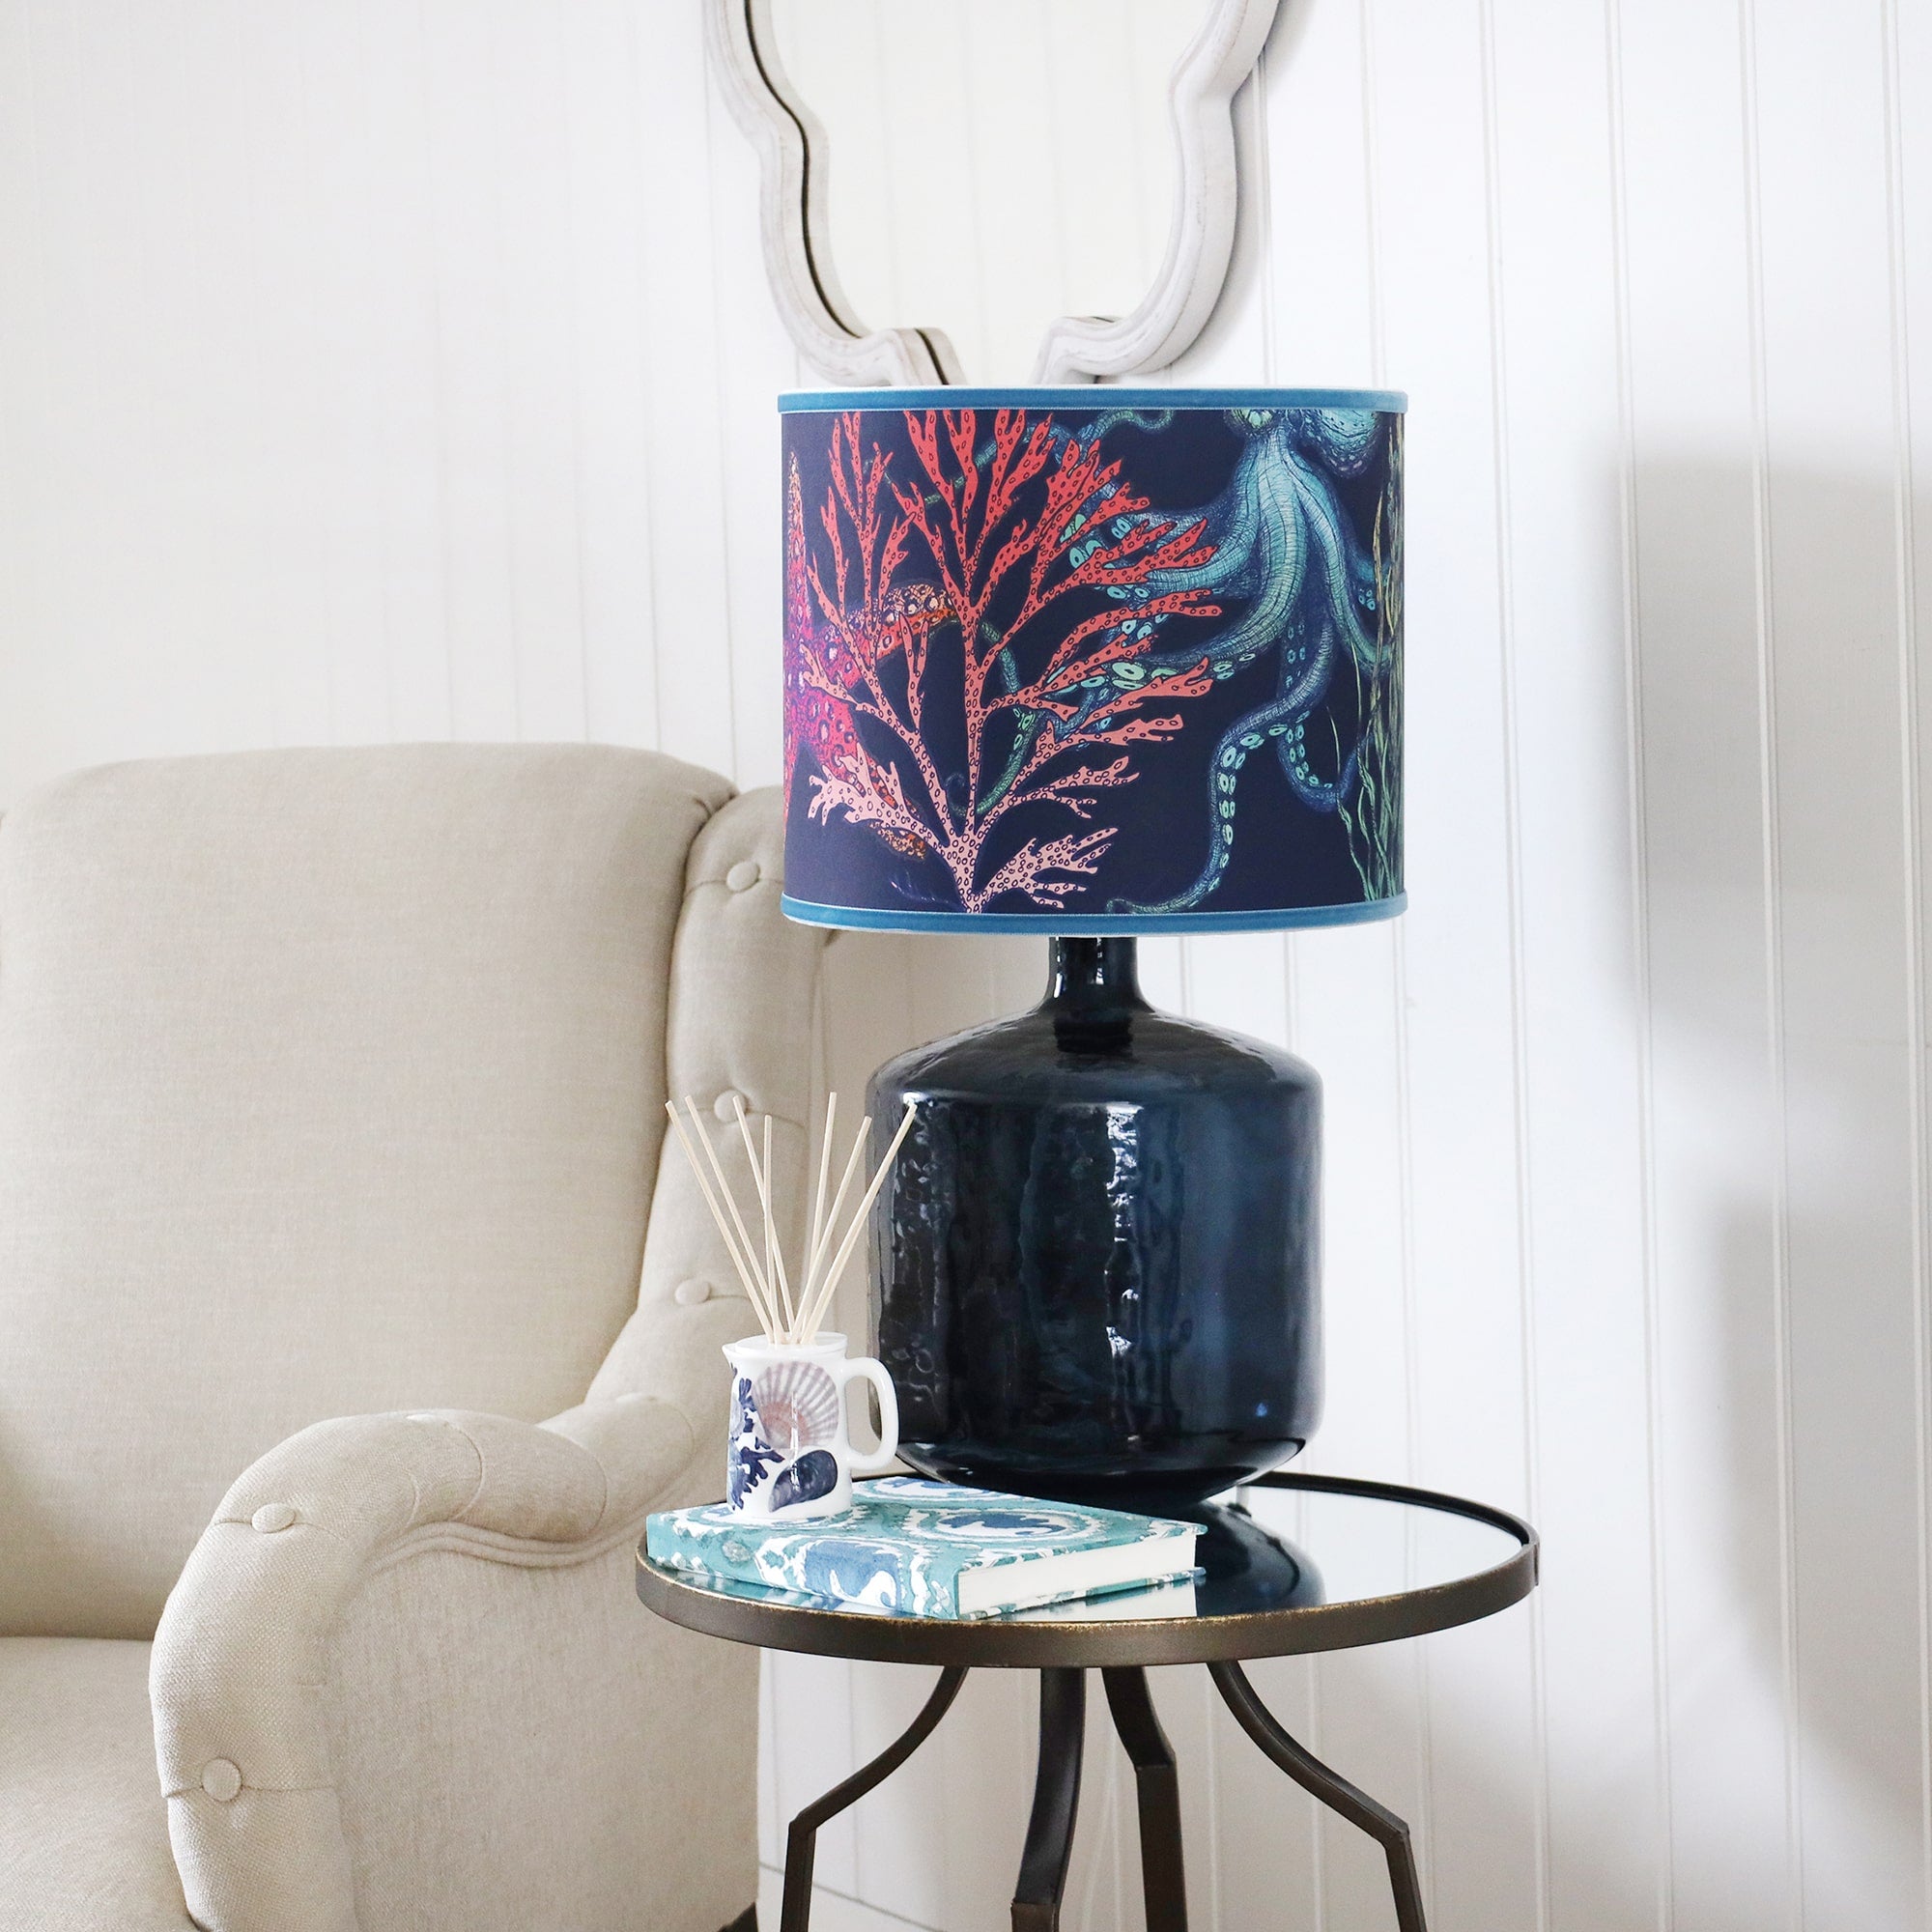 Zennor Glass lampbase with a Navy Reef lampshade on a mirror table.On the table is a  Beachcomber diffuser and a notebook.Next to the table is a chair on the wall behind is a wave mirror.